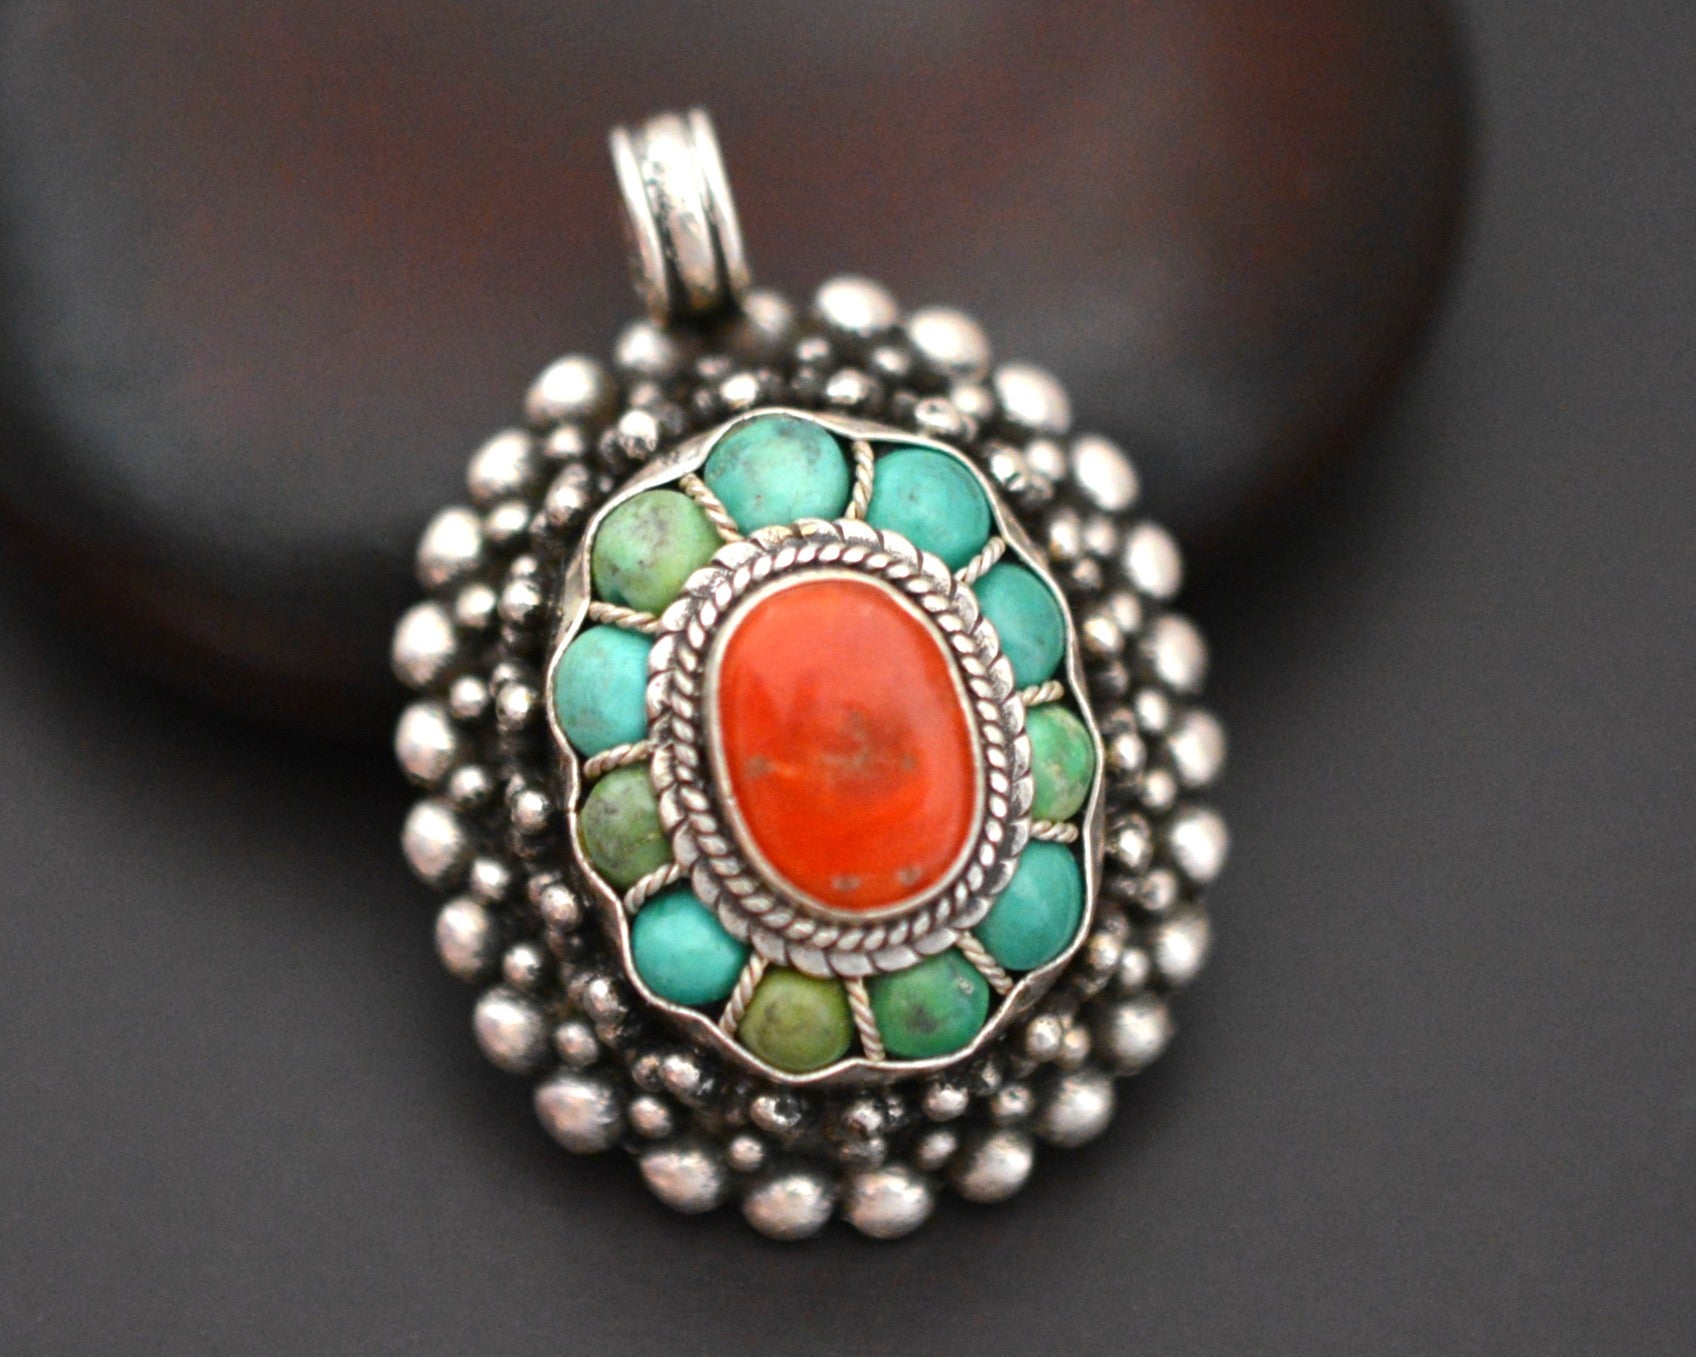 Reseved for A. - Bold Nepali Coral and Turquoise Pendant